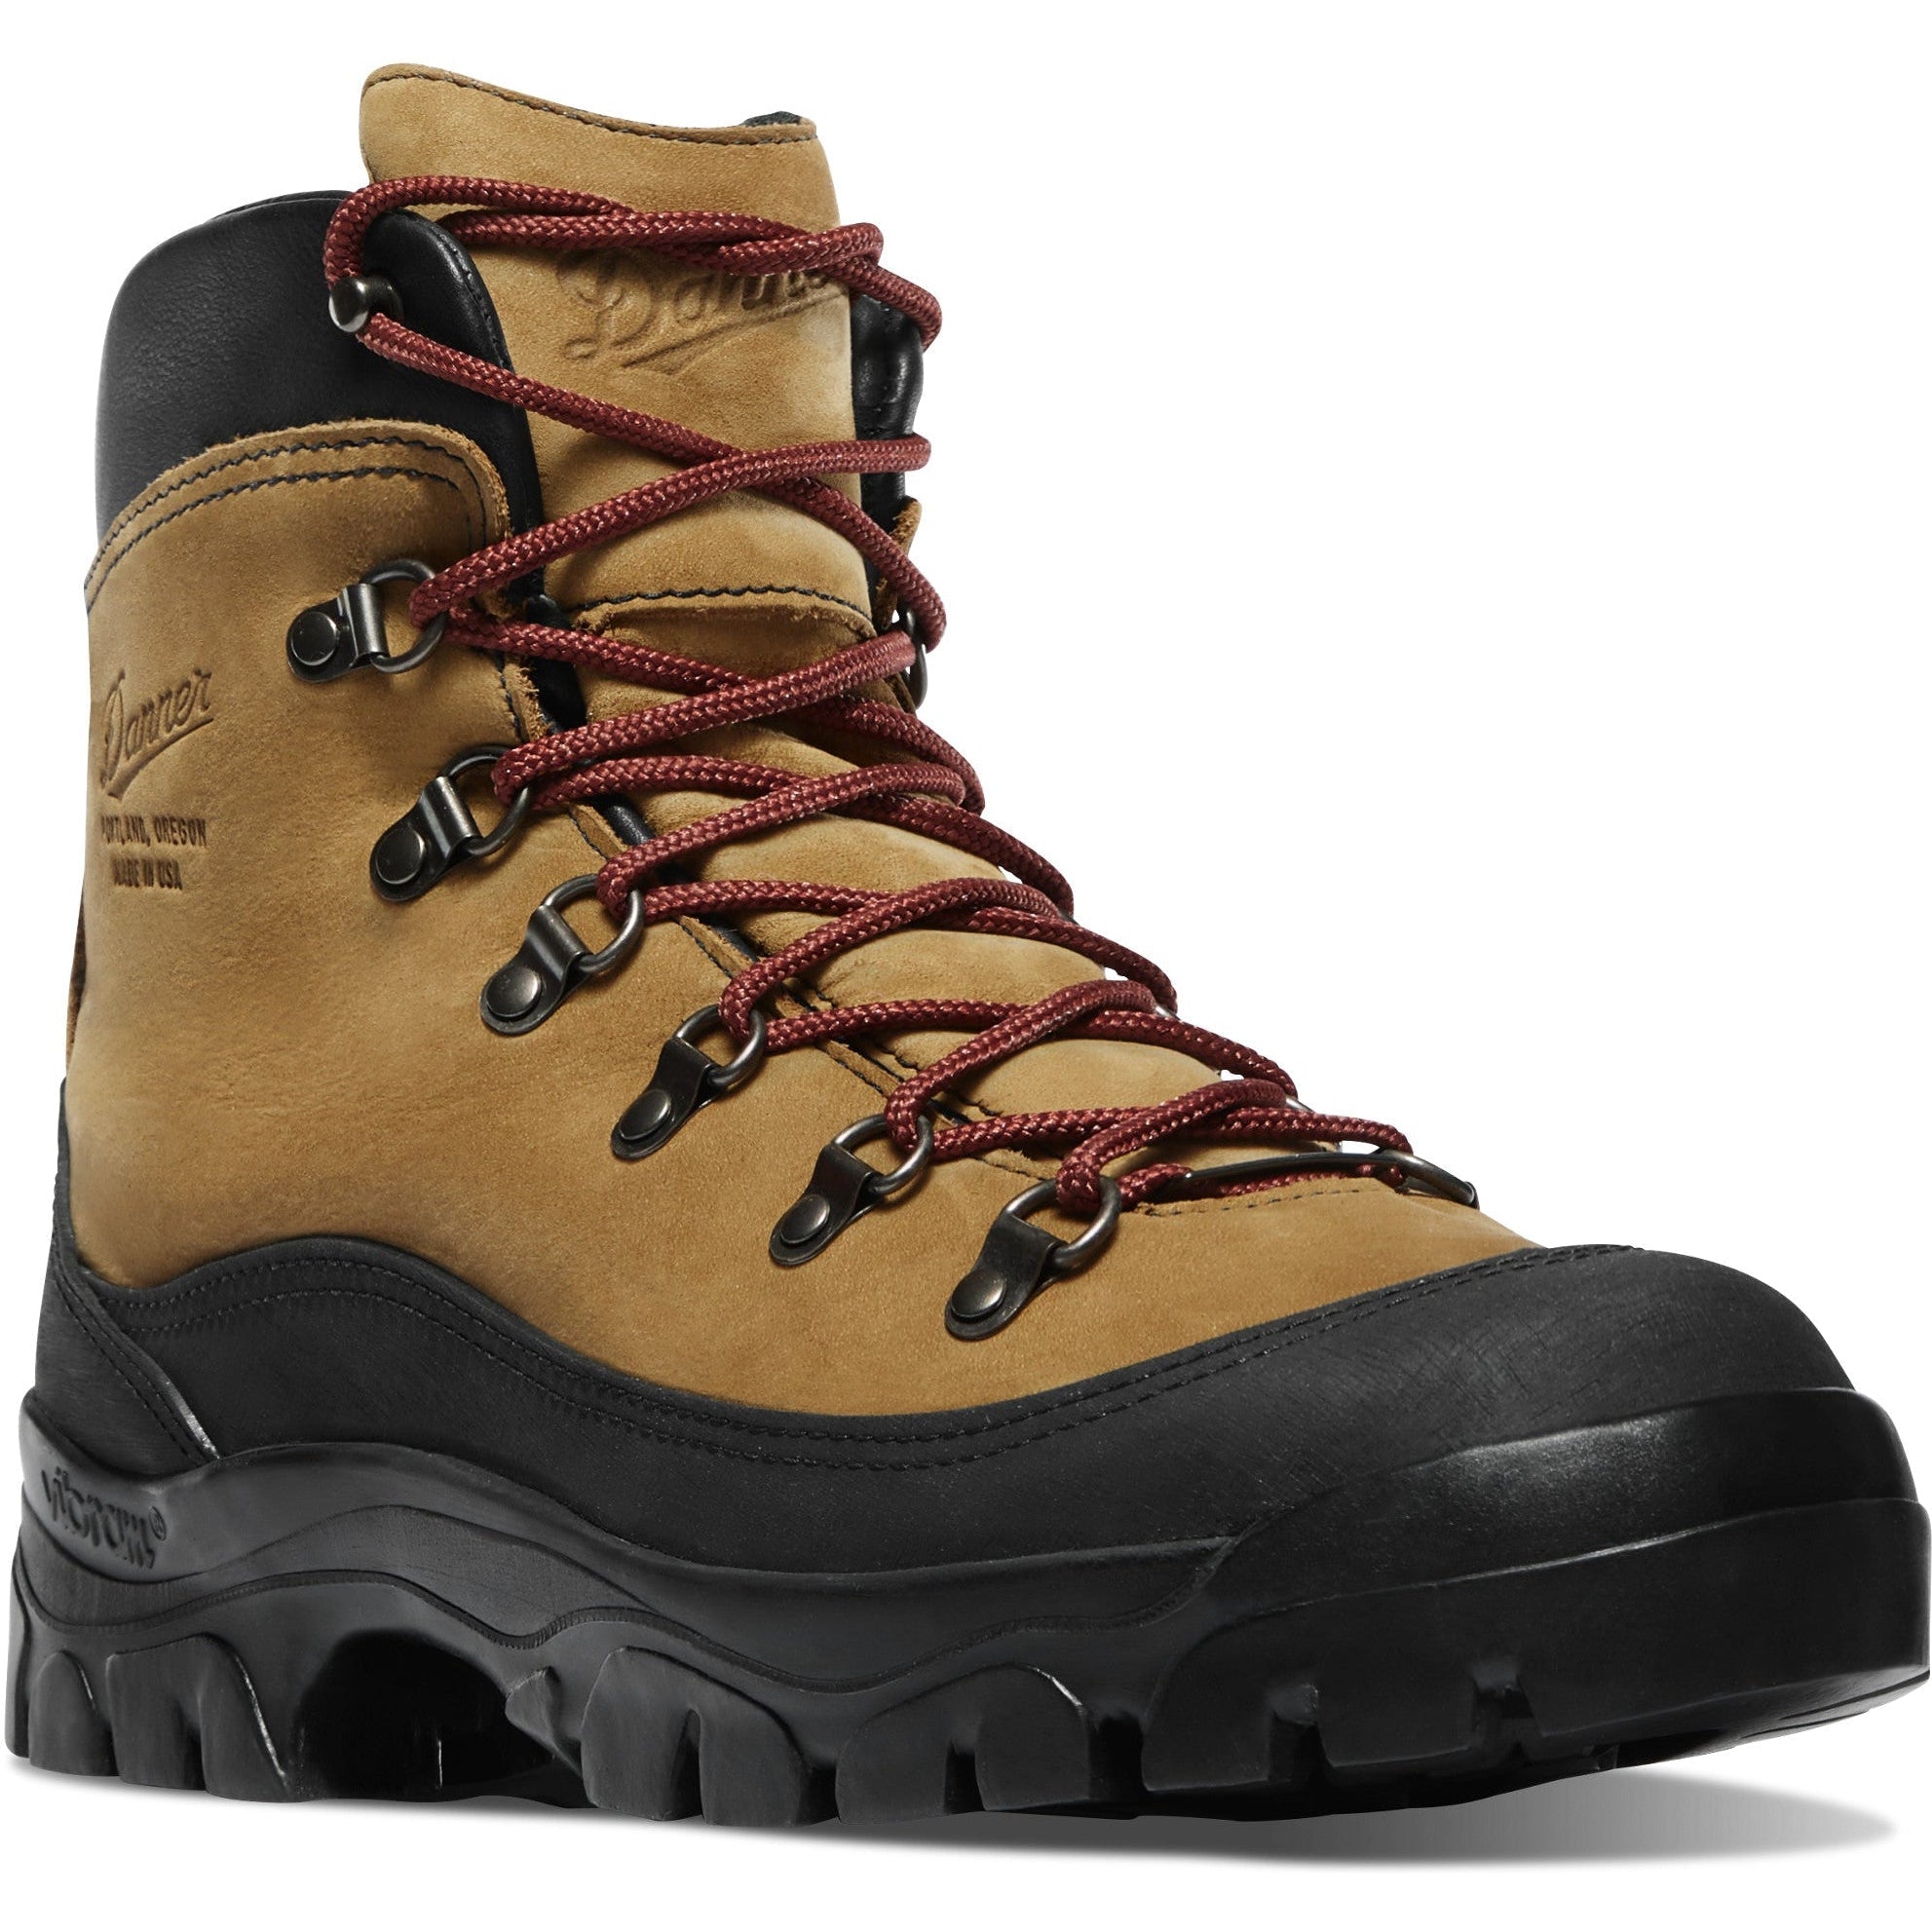 Danner Women's Crater 6" WP Made in USA Hiking Boot - Brown - 37414 5 / Medium / Brown - Overlook Boots